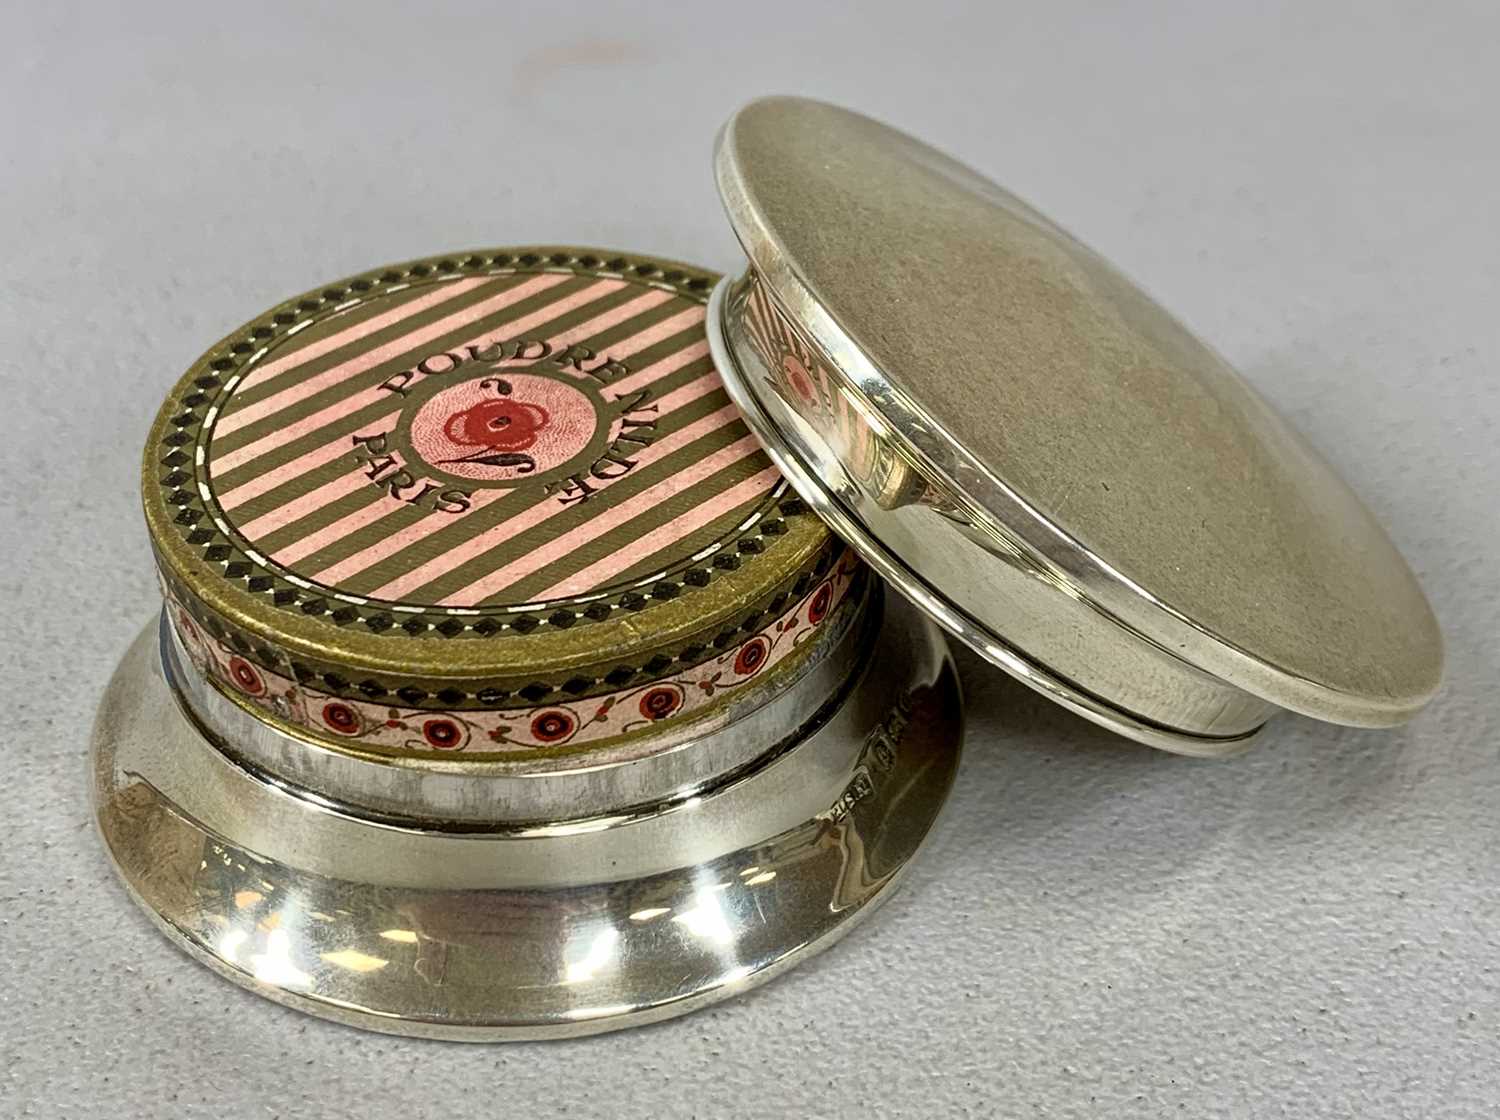 GEORGE V CIRCULAR SILVER ROUGE BOX, of plain design with domed cover, containing a box of Poudre - Image 2 of 3